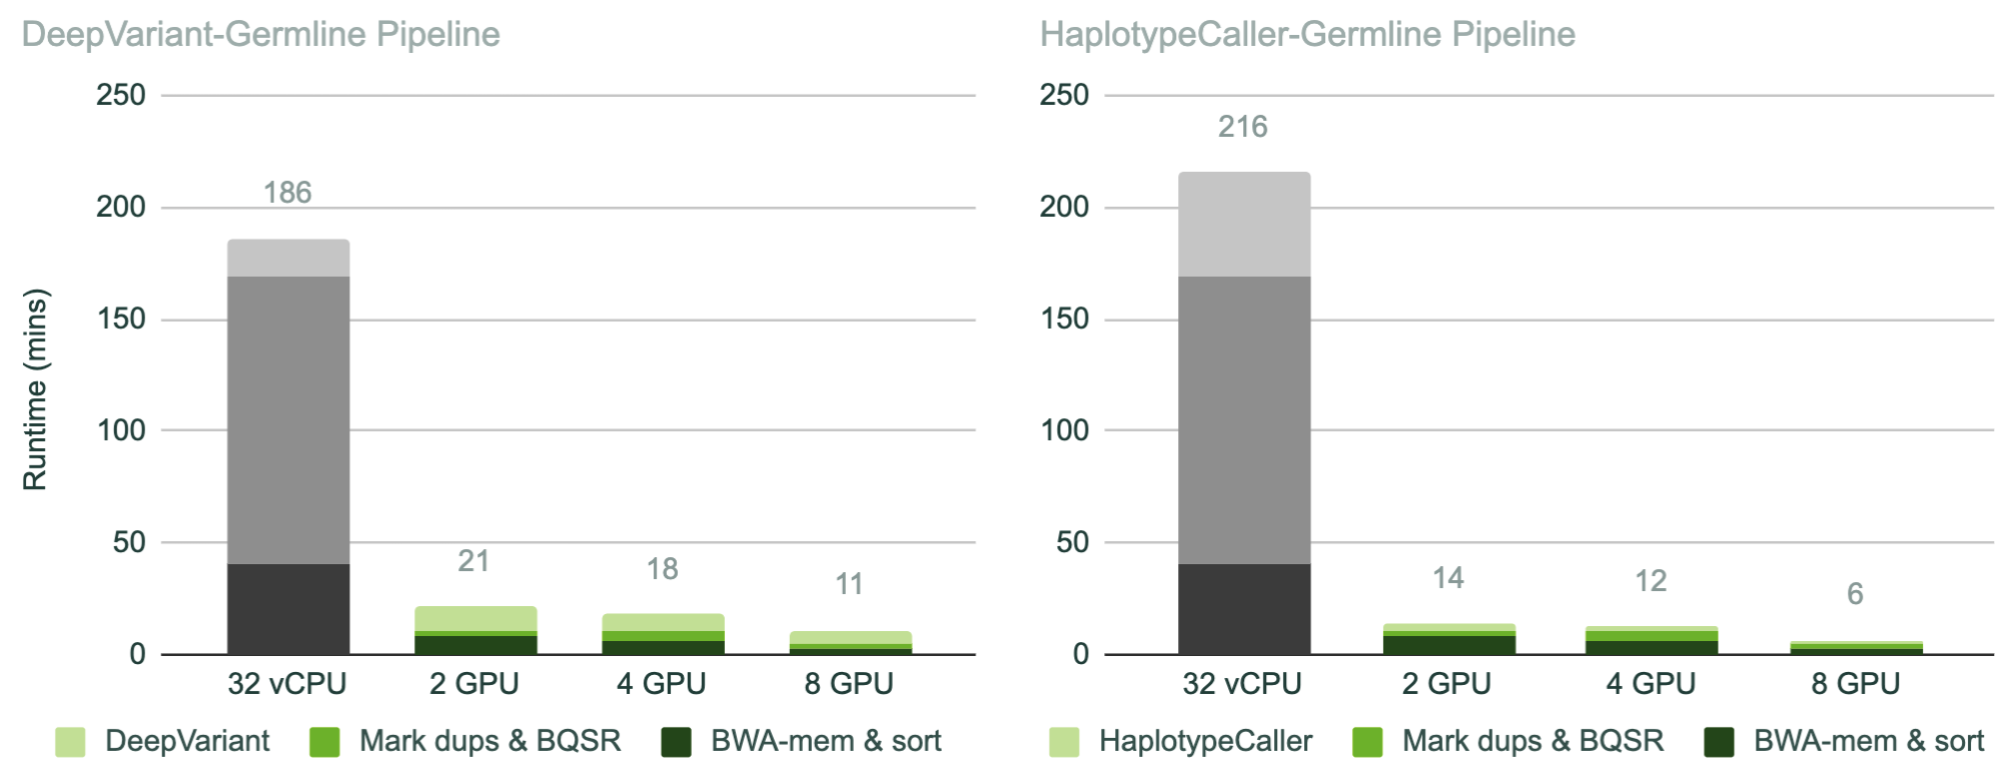 Bar charts showing acceleration of runtime from 186 minutes to 11-21 minutes on GPUs for DeepVariant and 216 minutes to 6-14 minutes for HaplotypeCaller.
